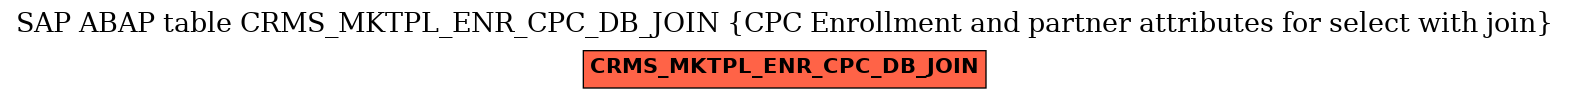 E-R Diagram for table CRMS_MKTPL_ENR_CPC_DB_JOIN (CPC Enrollment and partner attributes for select with join)